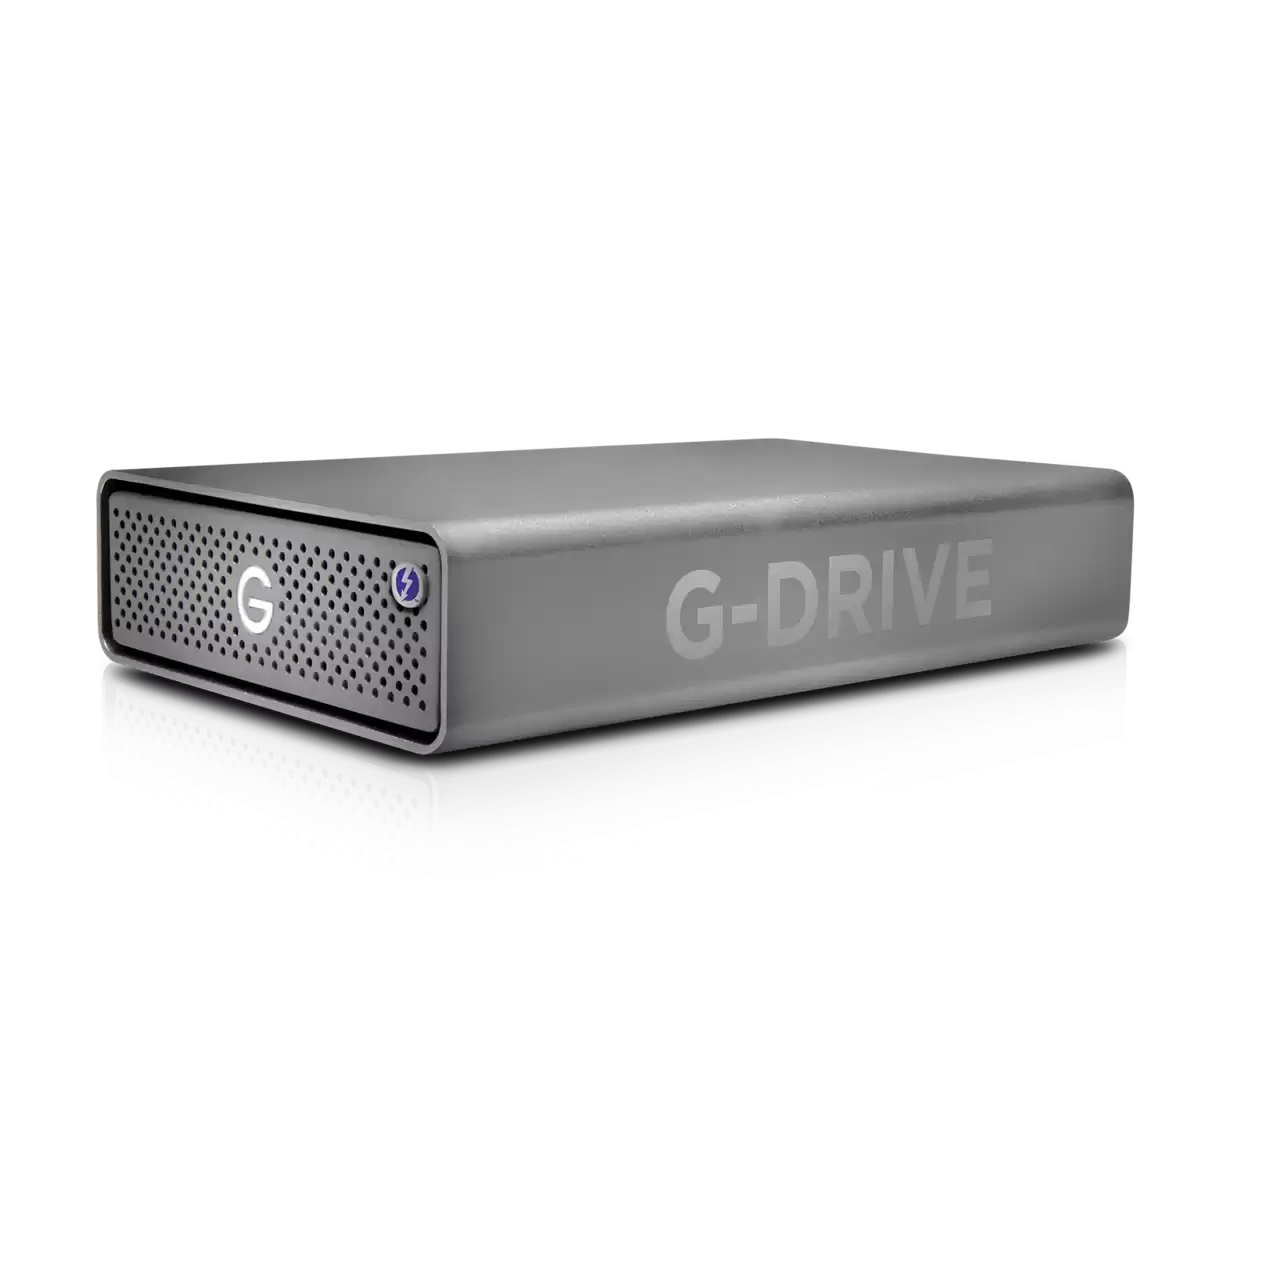 SanDisk G-DRIVE PRO external hard drive 12000 GB Stainless steel